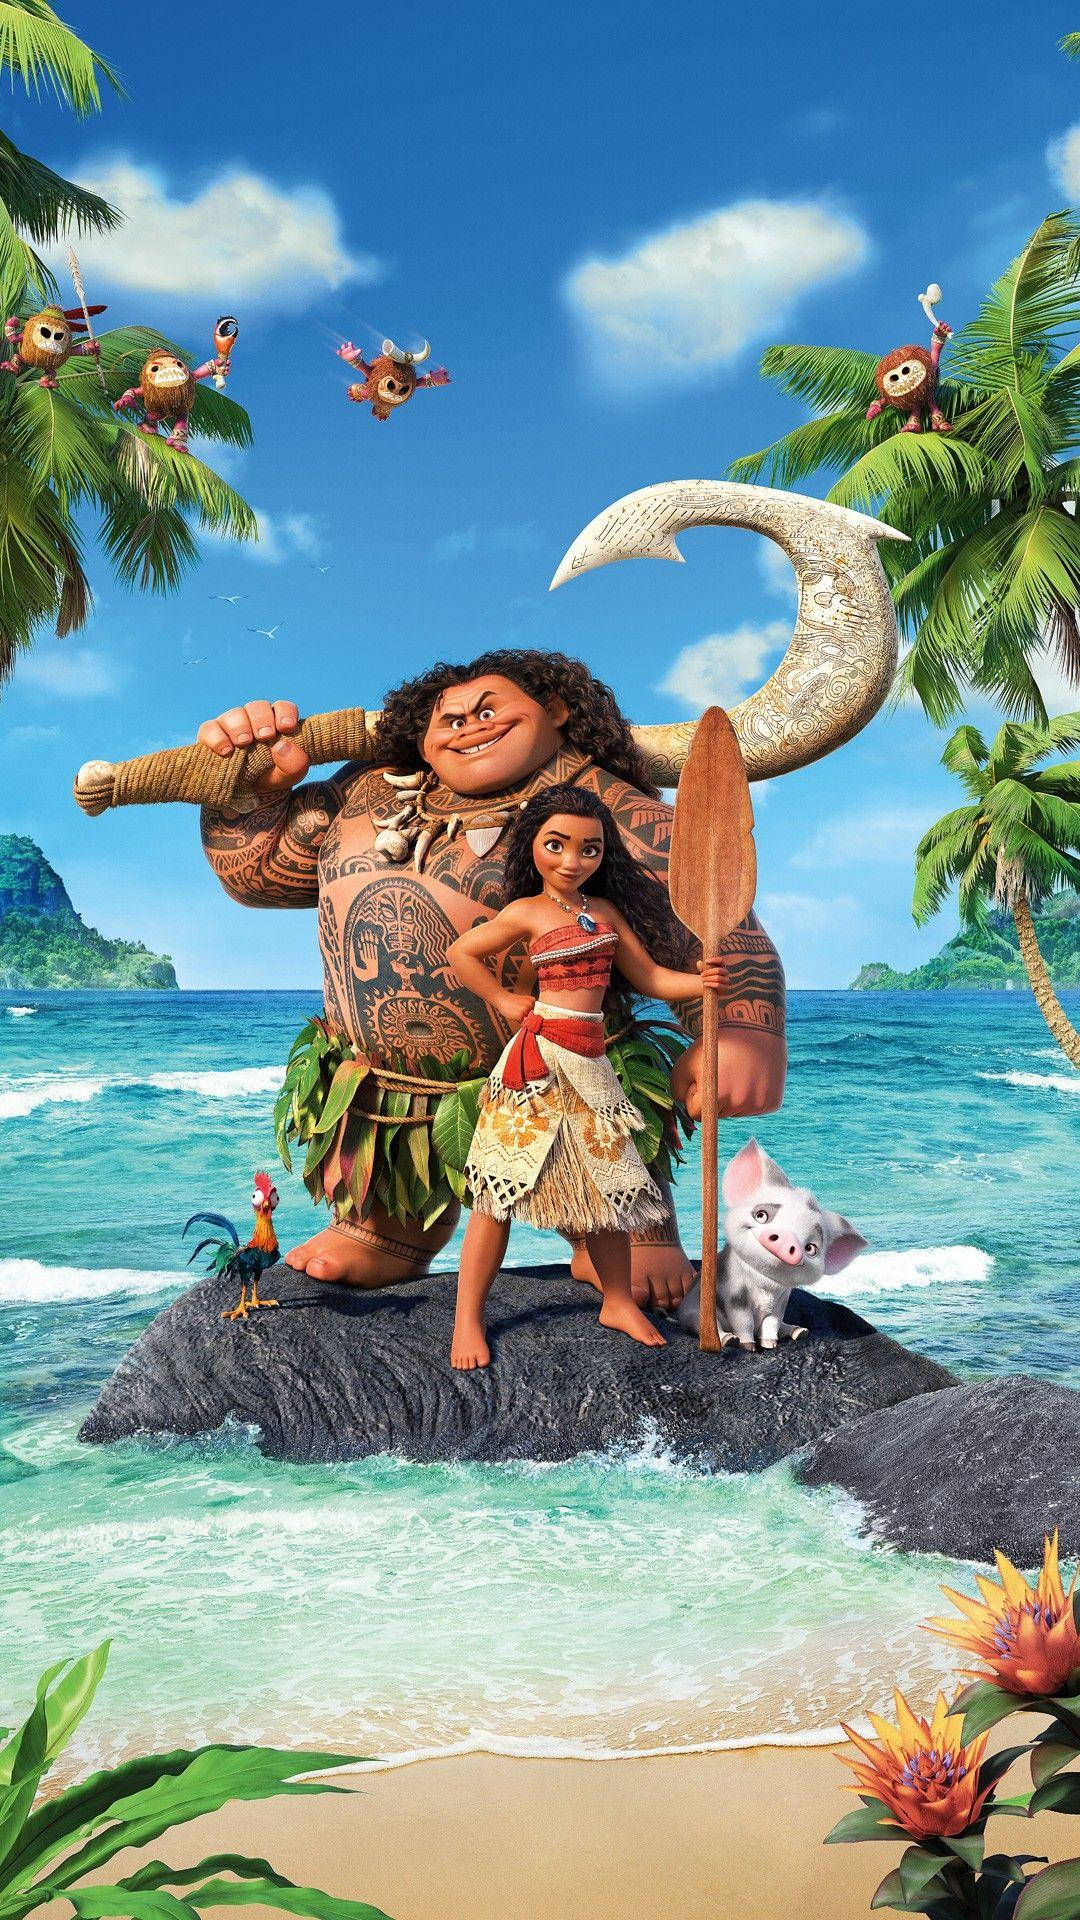 Astounding 8k Display Of The Moana Movie Poster On An Iphone